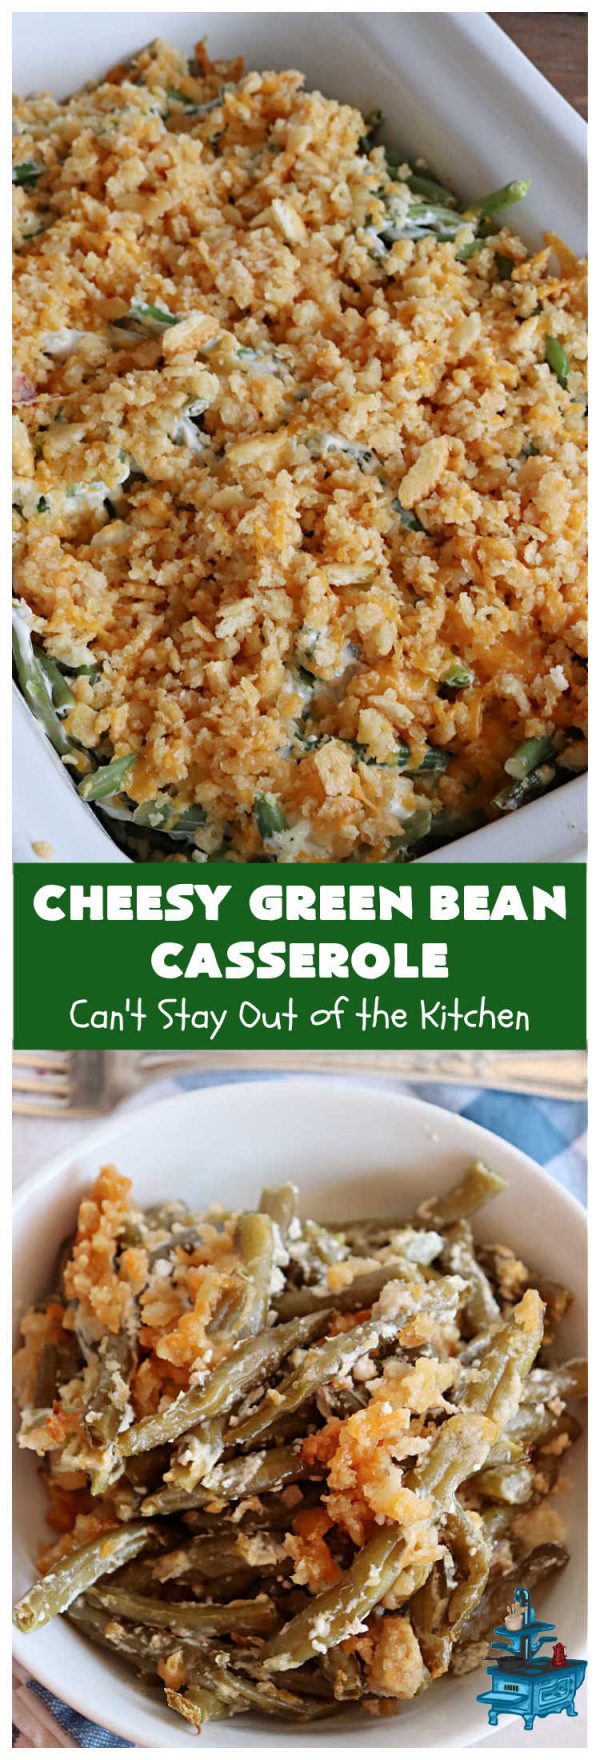 Cheesy Green Bean Casserole – Can't Stay Out of the Kitchen